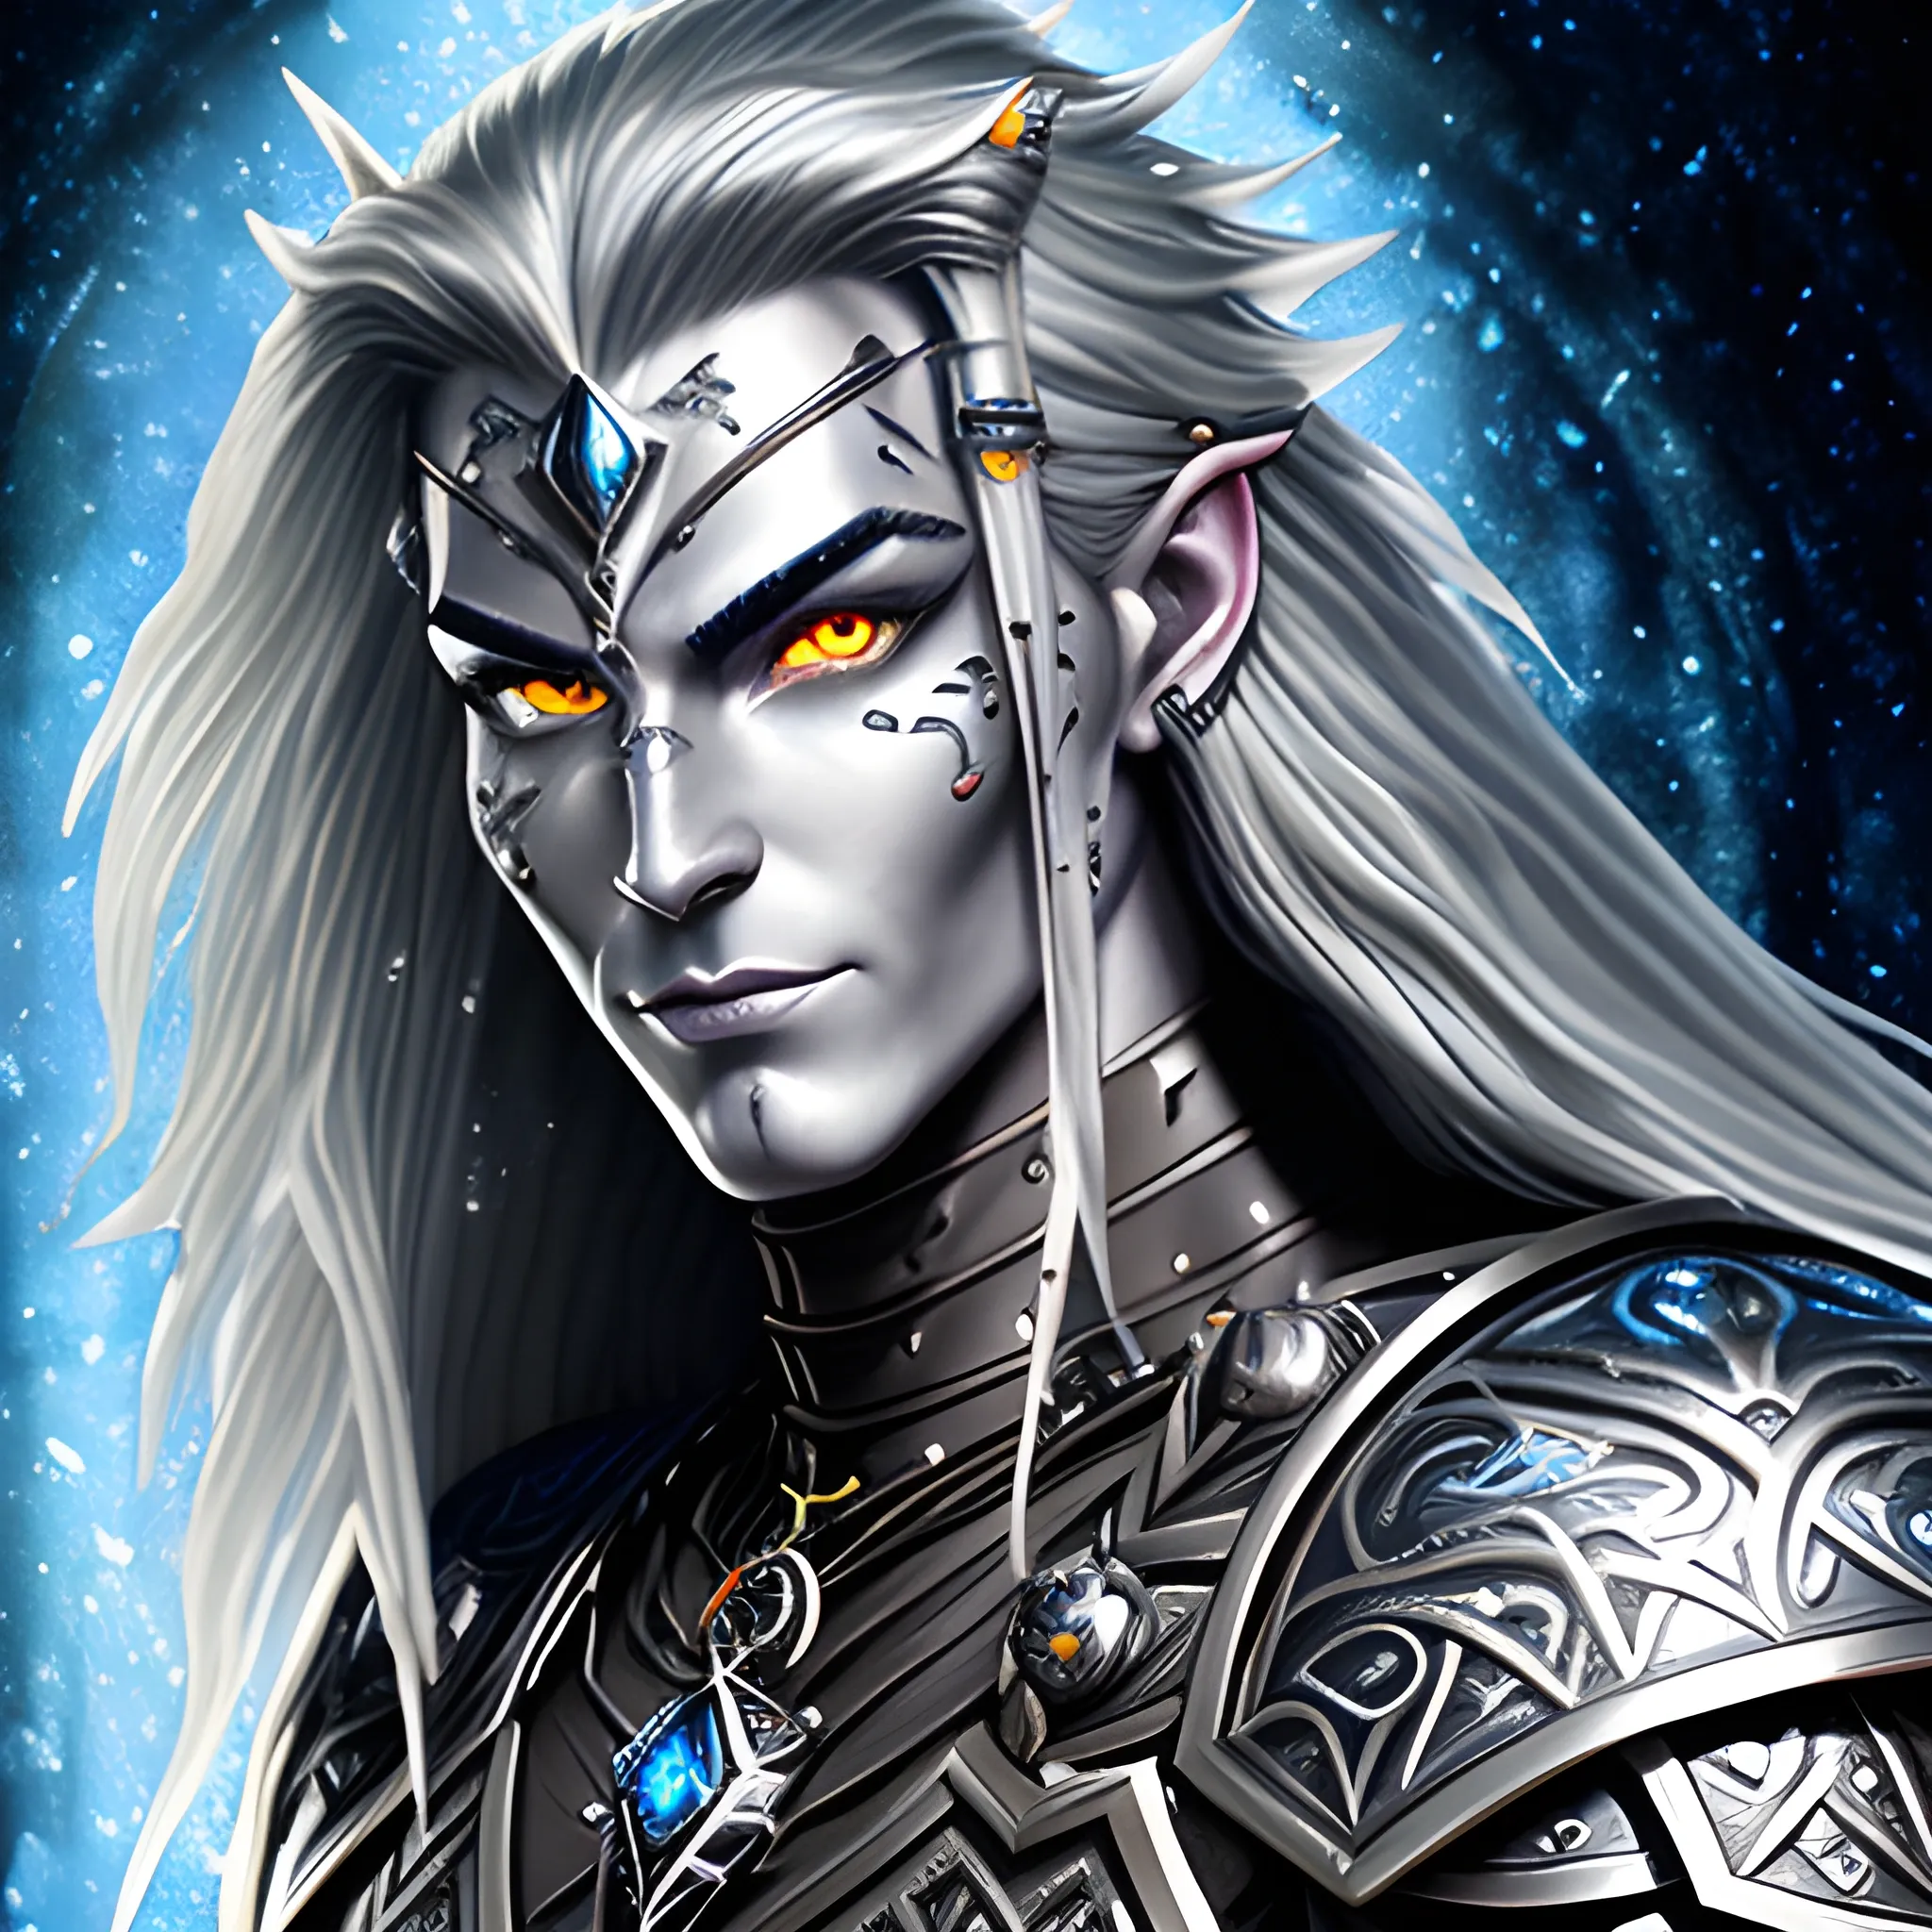 fantasy, paladin, warrior, metal skin, male, long black hair, icy eyes, blue eyes, intricate light silver armor, smiling, hyper realistic, dungeons and dragons, strong, armed, black hair, Oil Painting, filigree skin, silver skin, silver flame necklace, grey skin, iron skin, platinum skin, human ears, Oil Painting, young, handsome, thin tribal facial tattoos, steel eyes, face tattoo, face scarring, aluminium skin, friendly, no helmet, happy, confident, black hair, grinning, good, warhammer